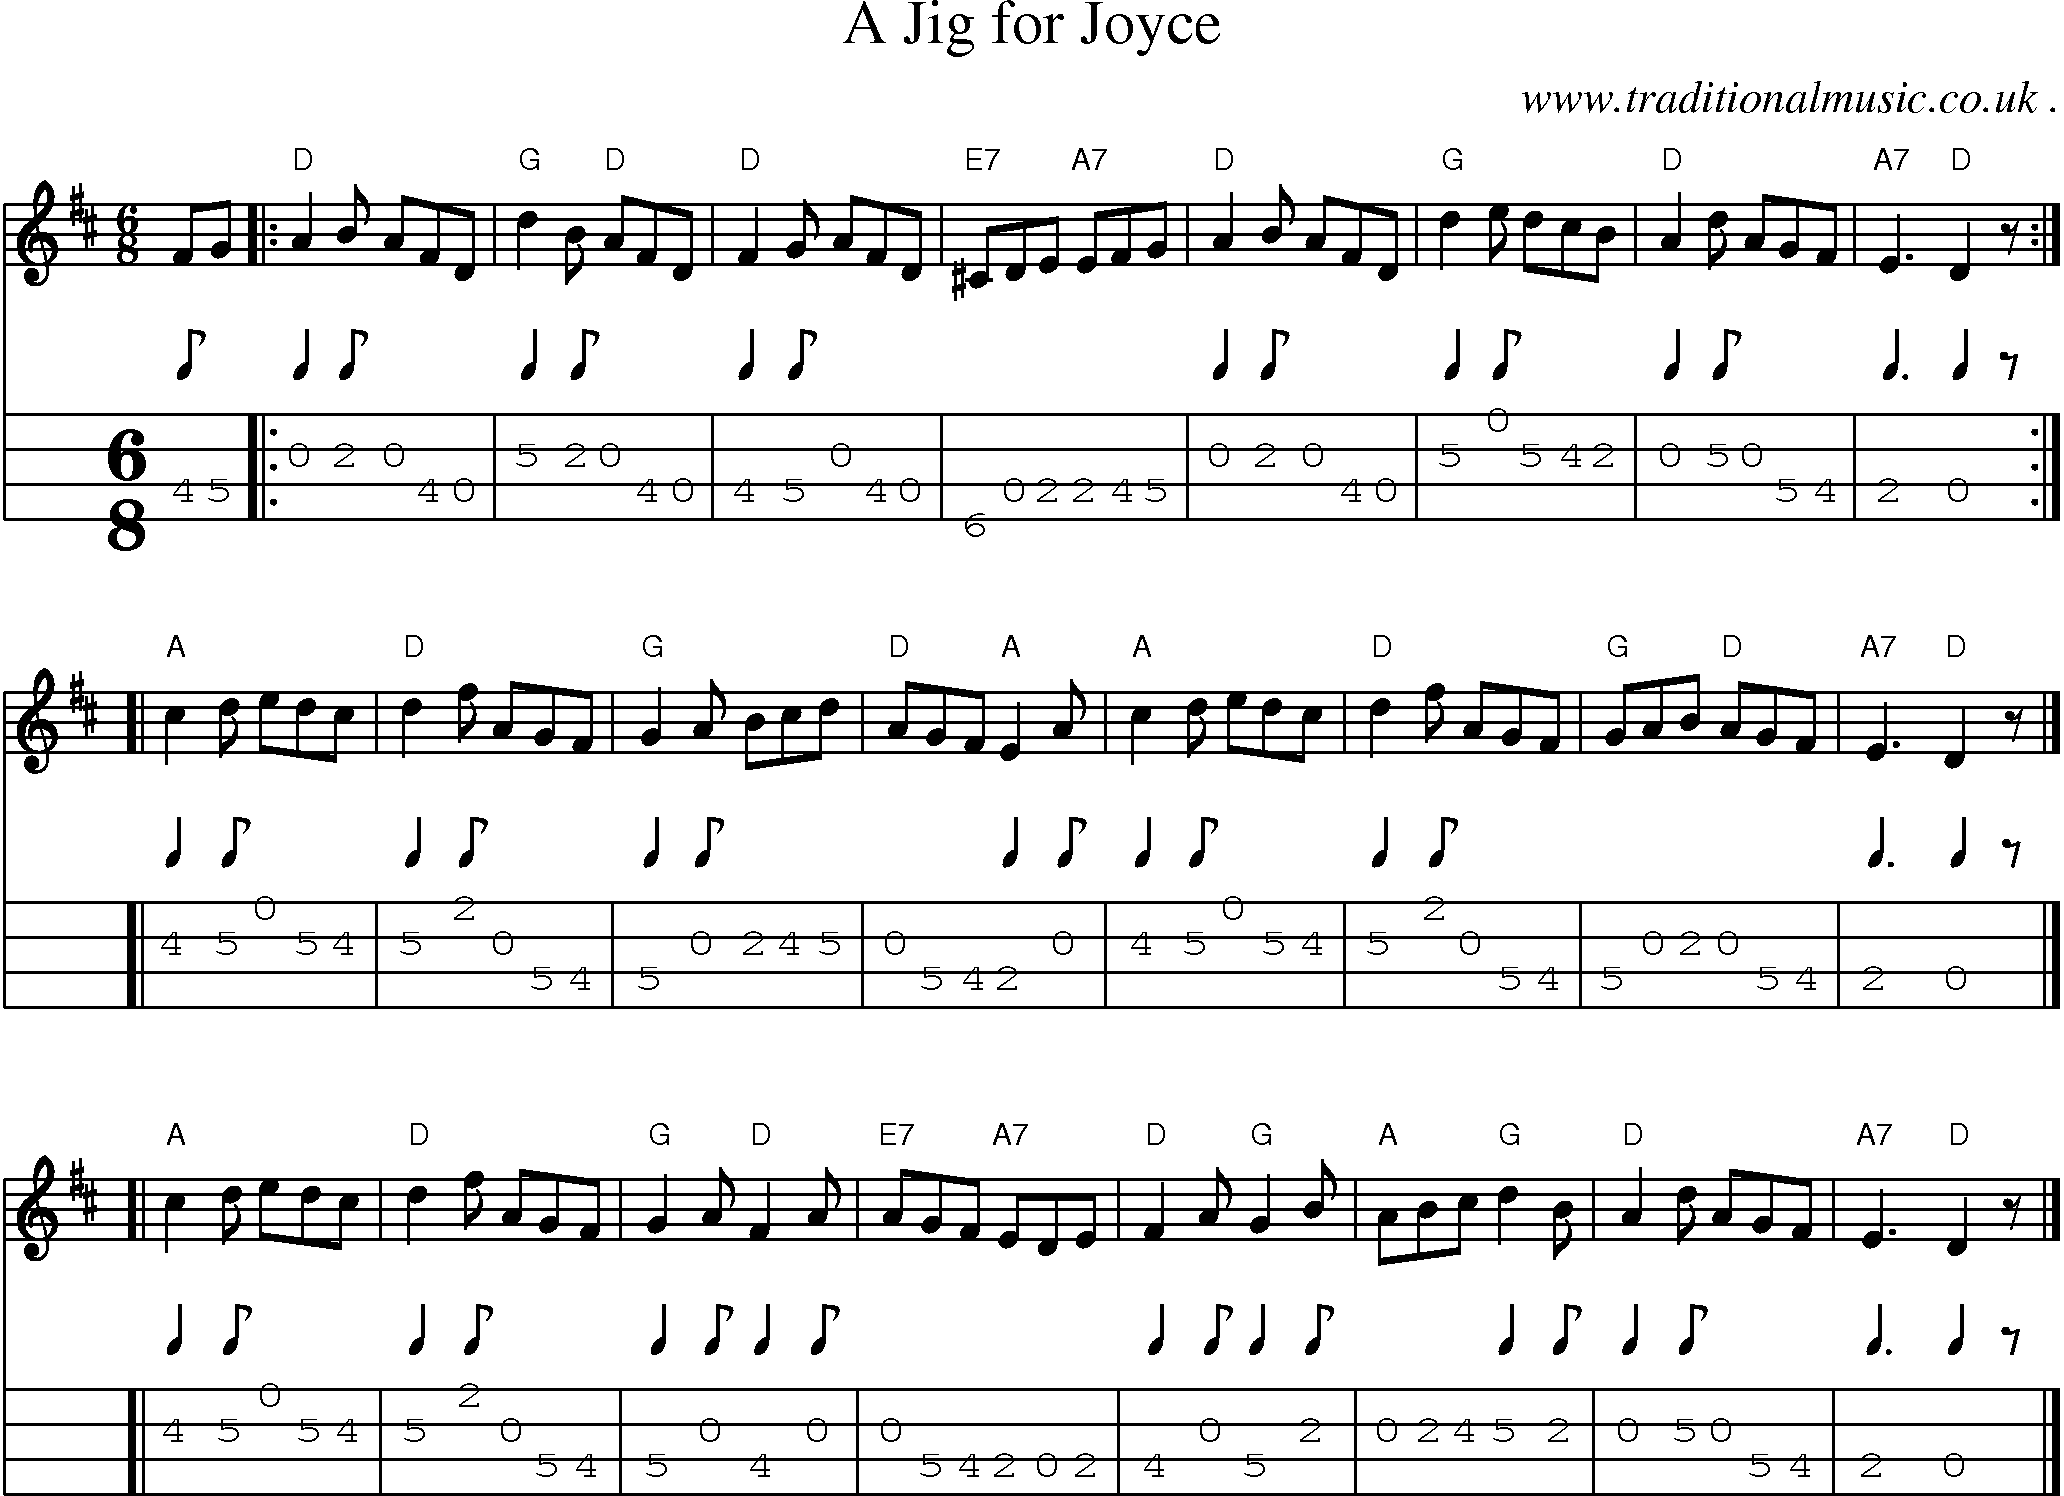 Sheet-music  score, Chords and Mandolin Tabs for A Jig For Joyce